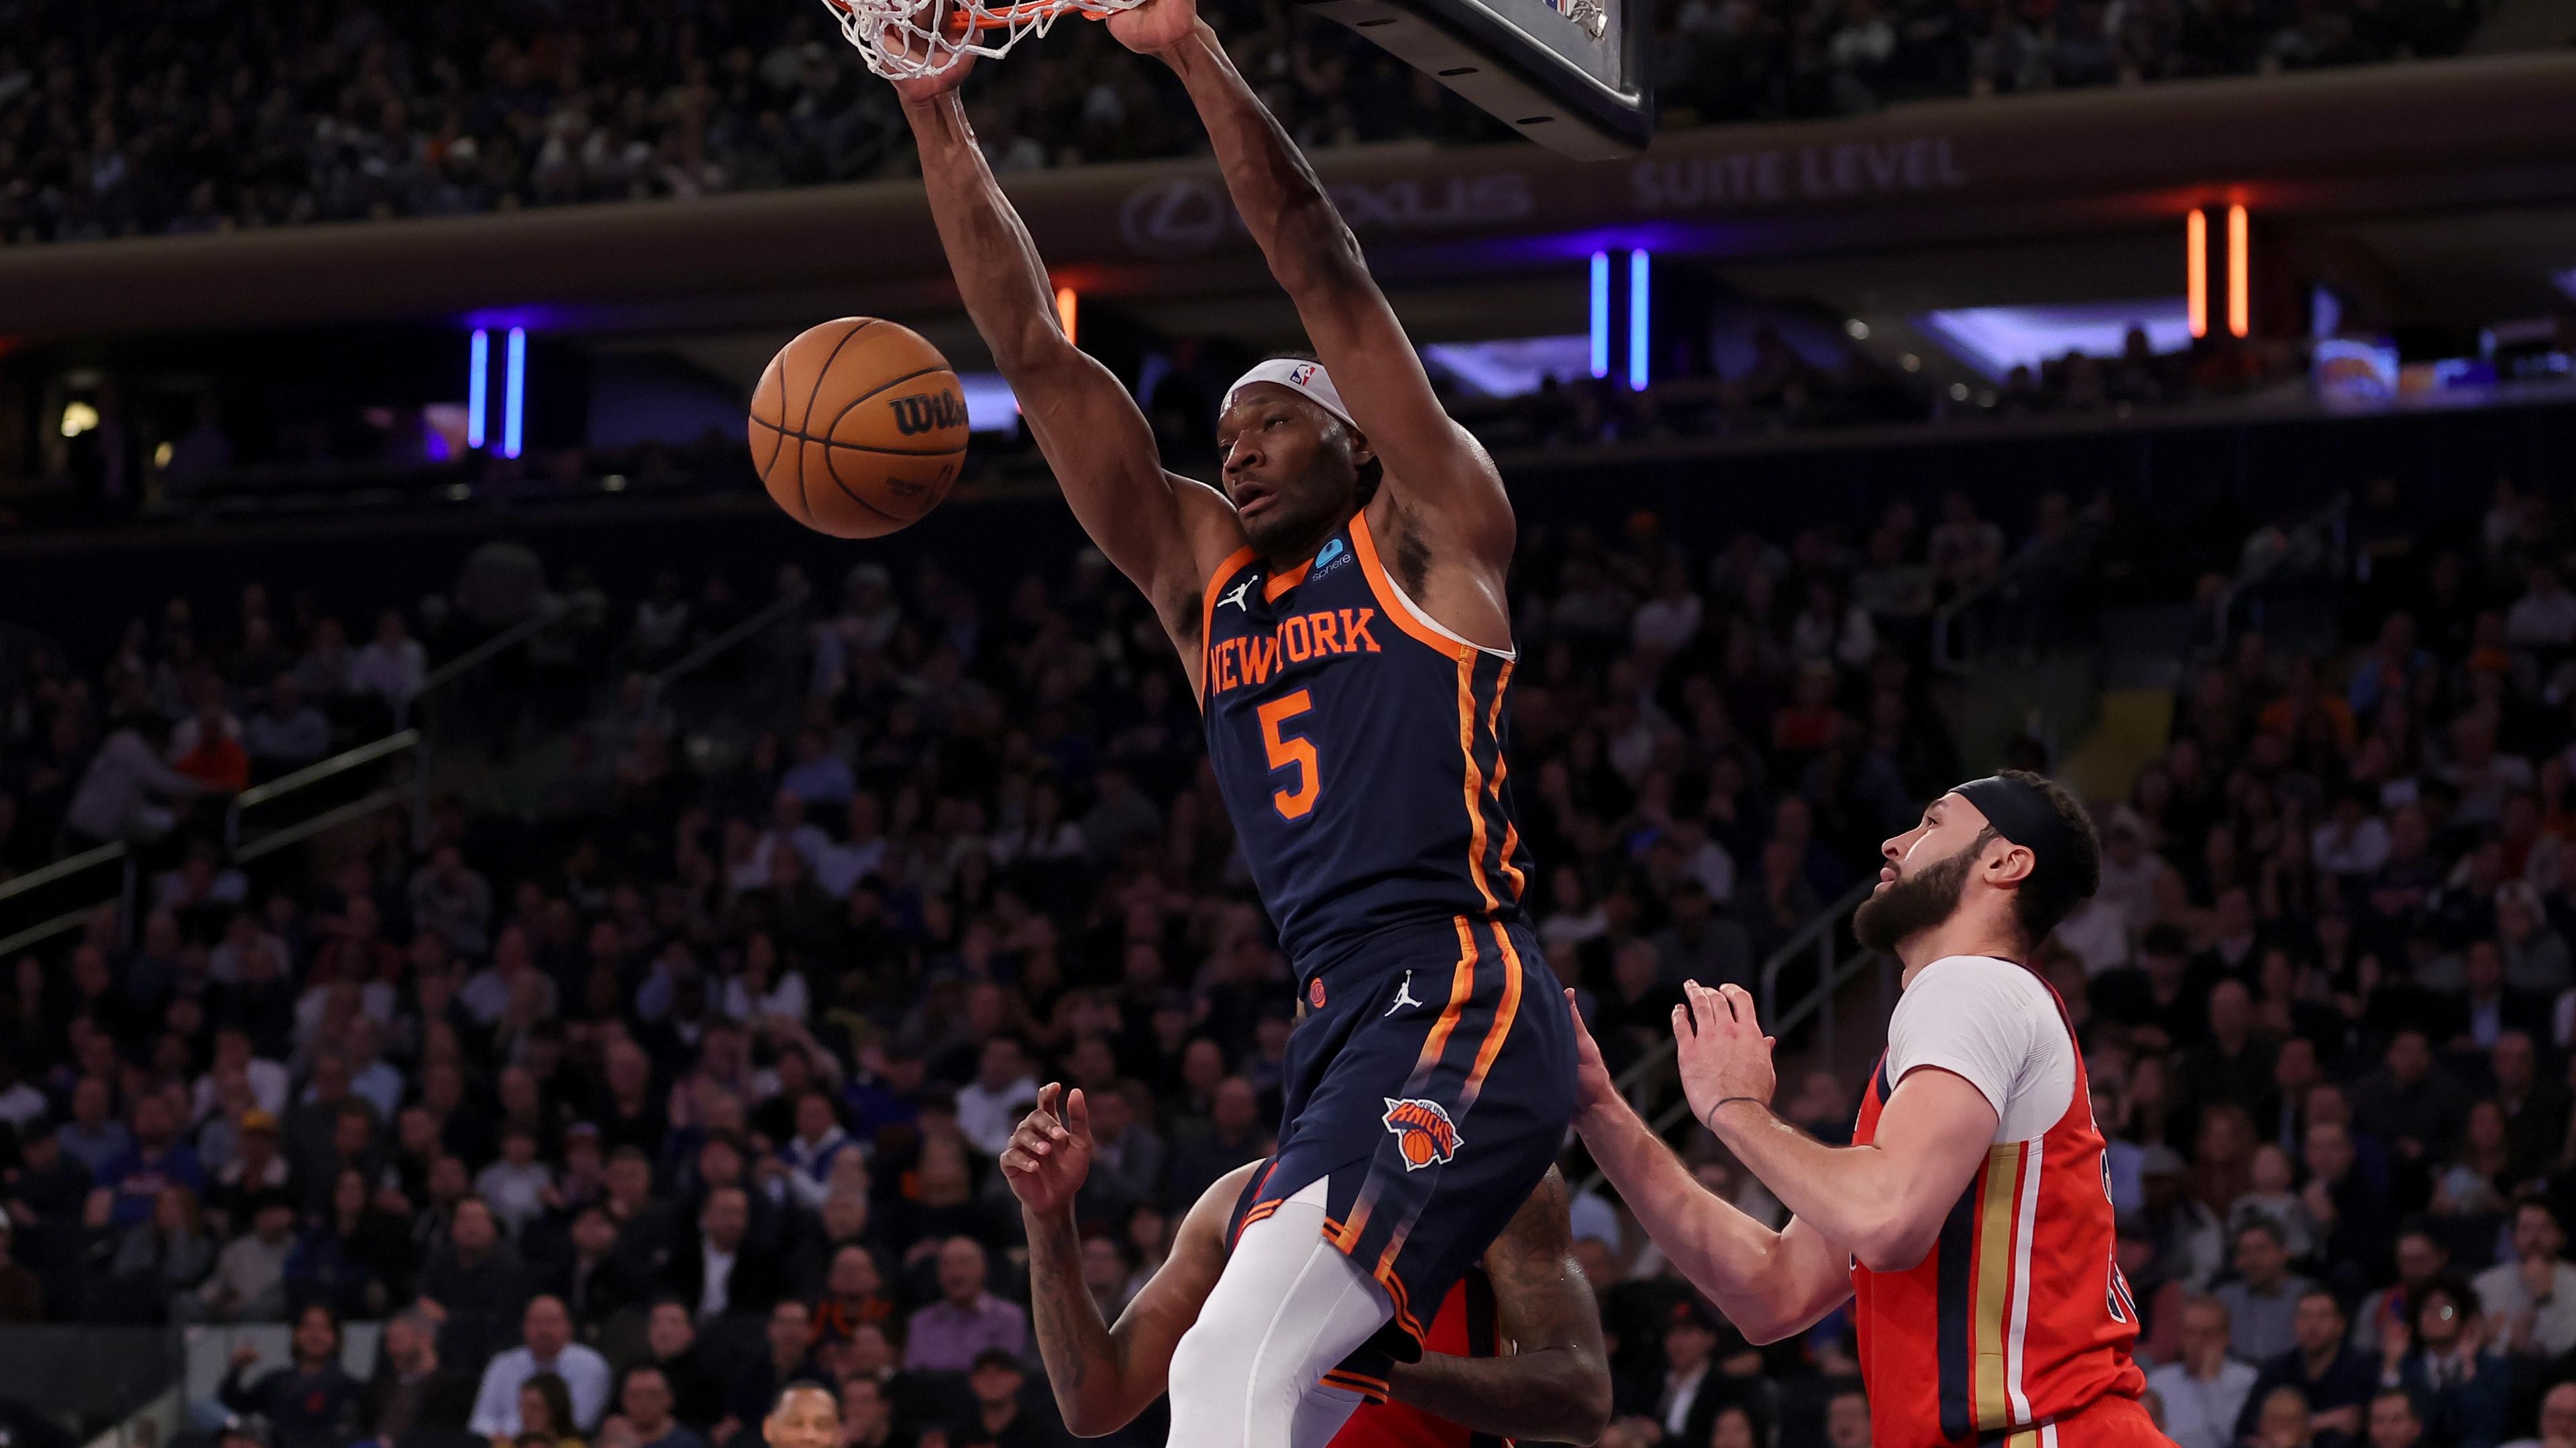 Knicks do not extend qualifying offer to Precious Achiuwa in flurry of moves: reports